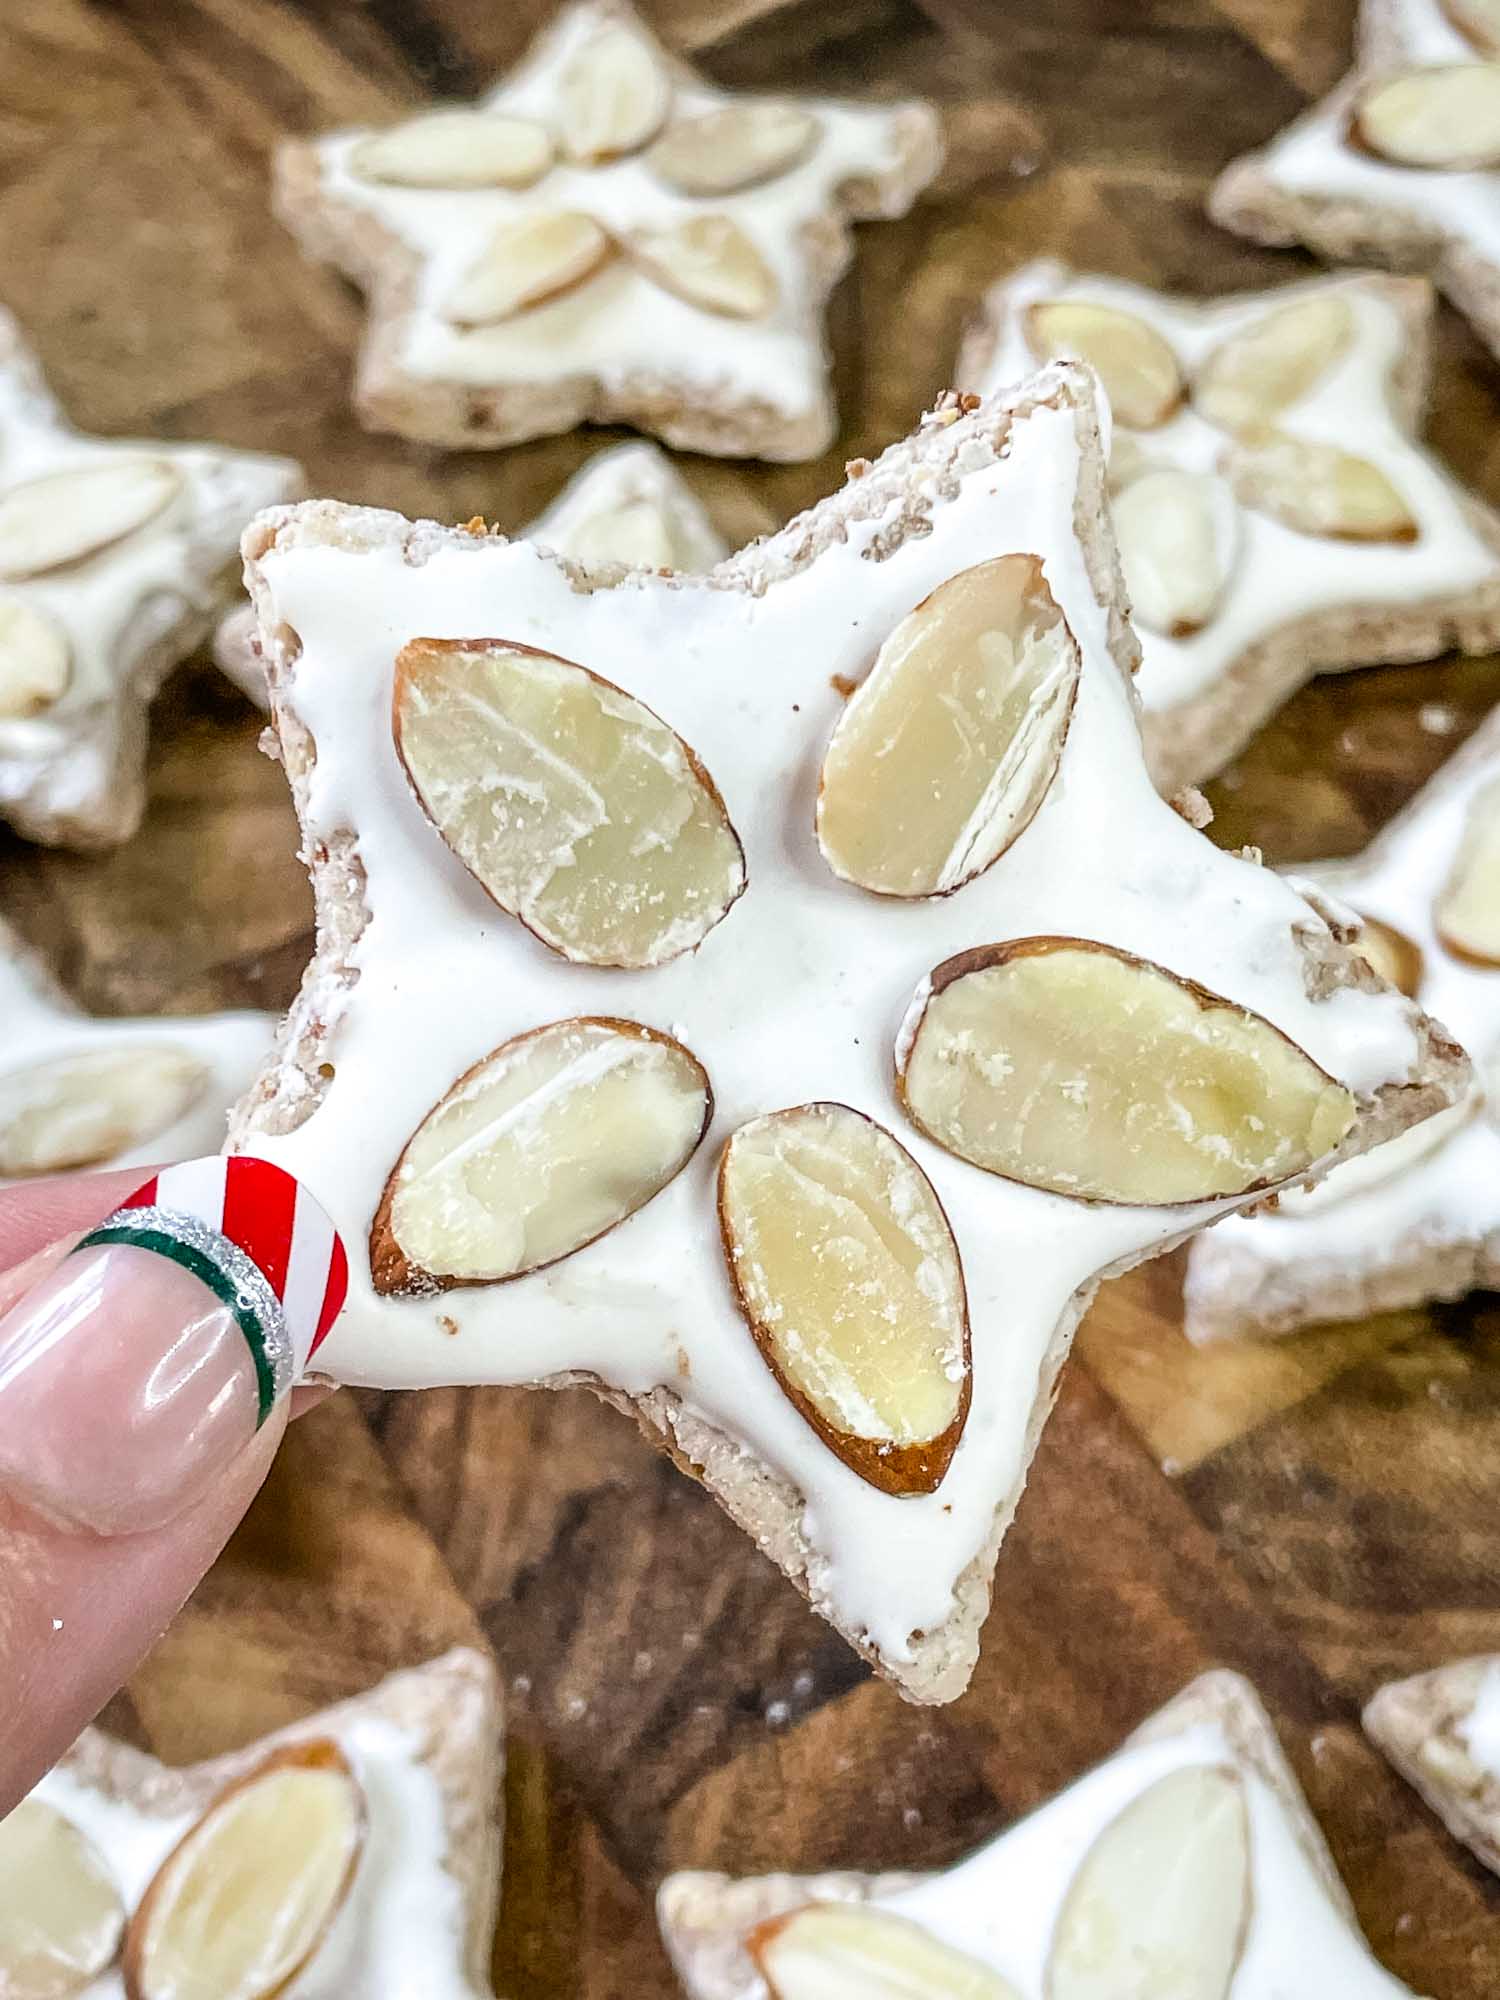 A hand holding a Zimmerstern (German Cinnamon Star Cookies)